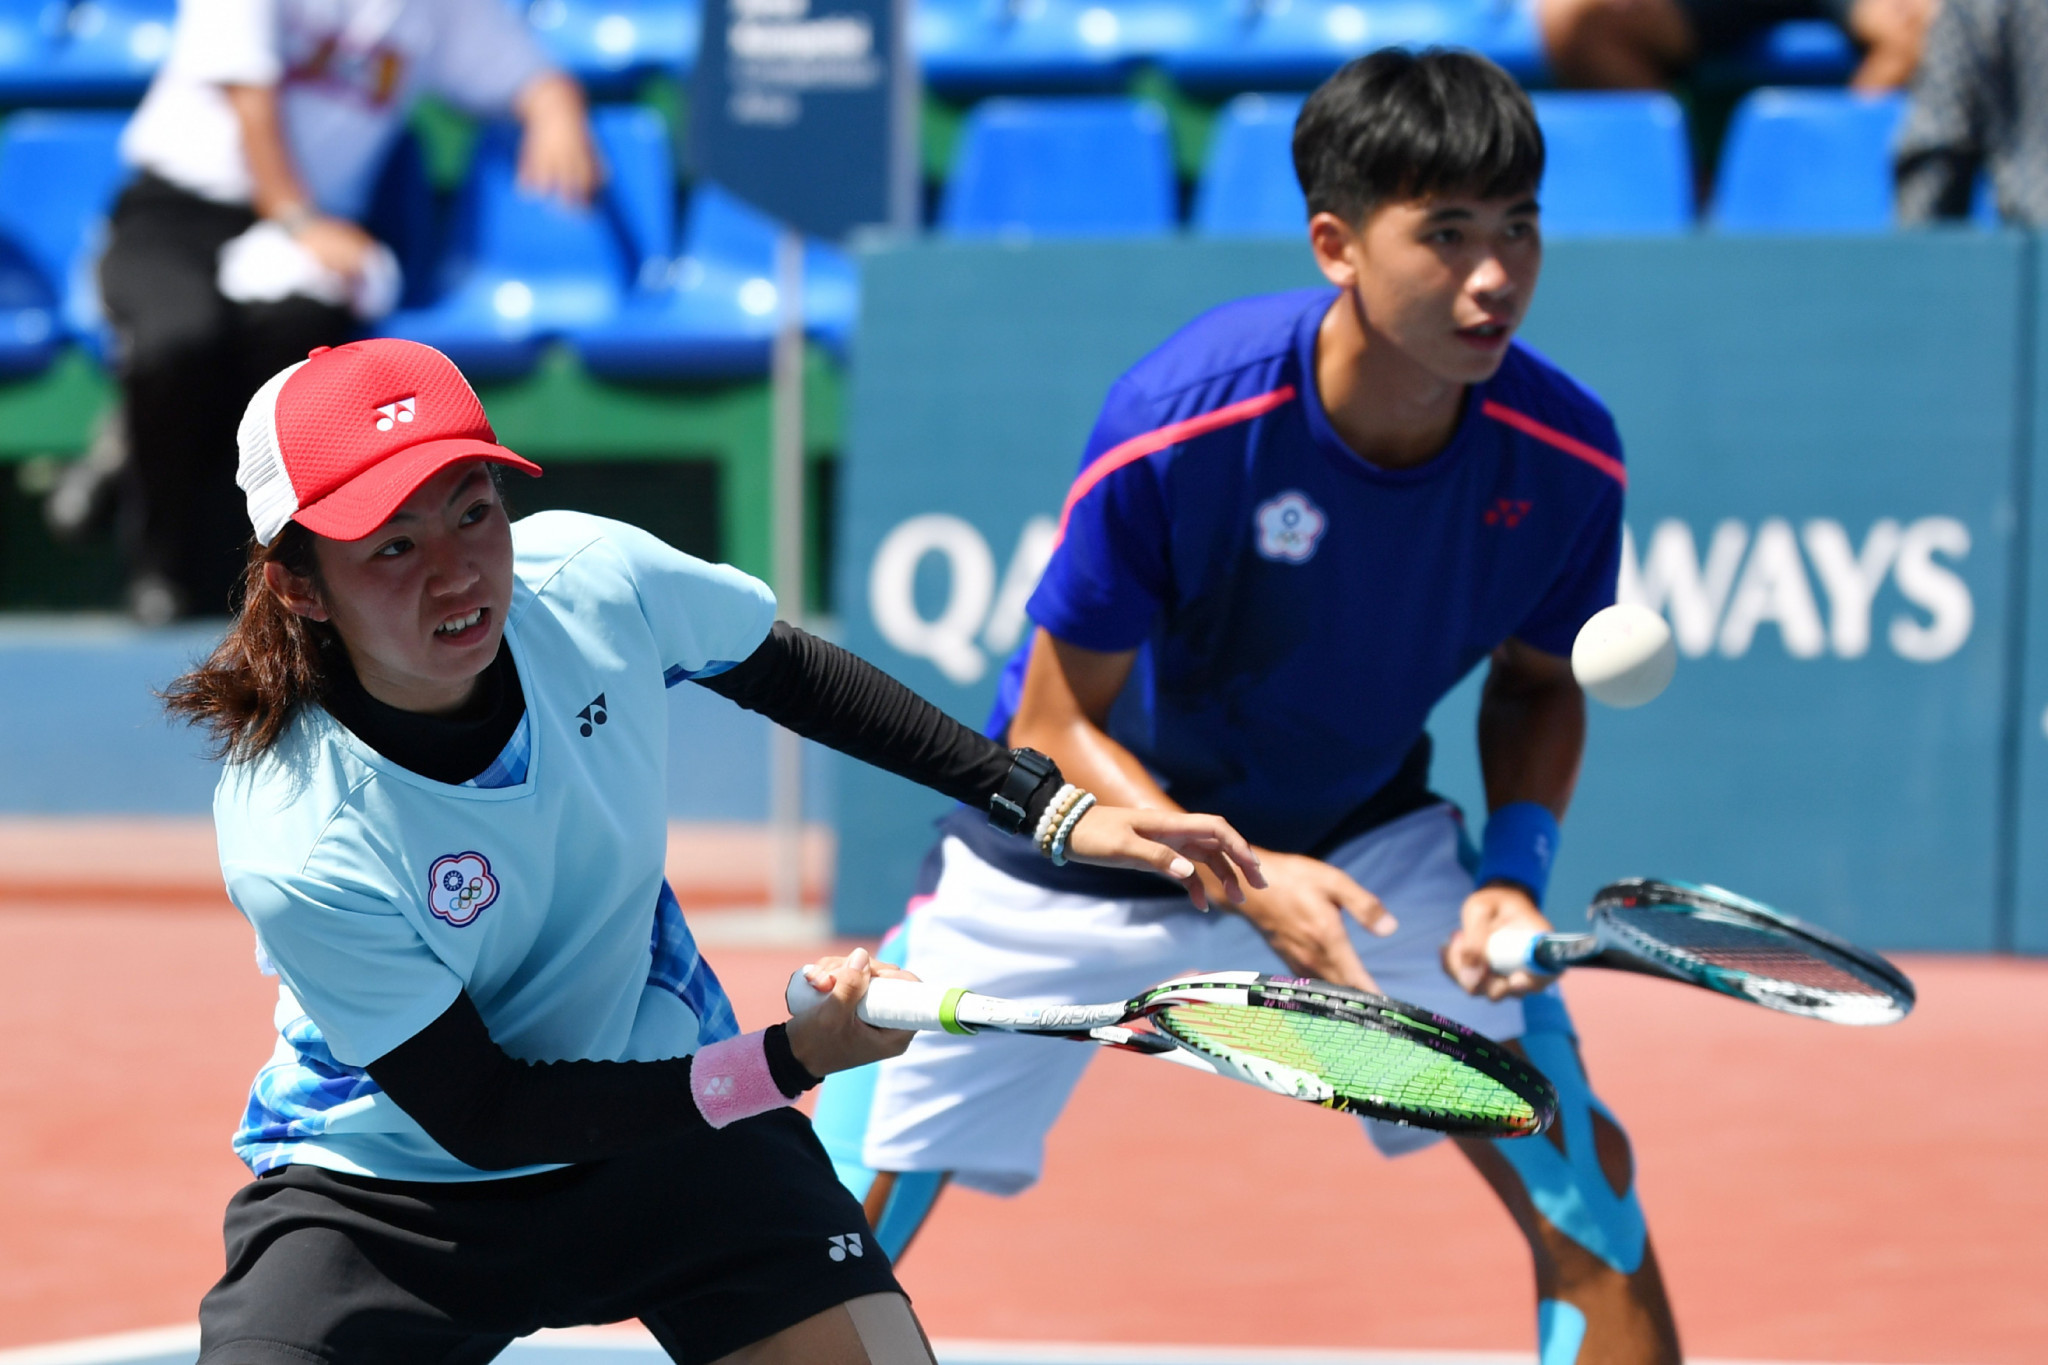 Chinese Taipei's Cheng Chuling and Yu Kaiwen beat South Korea's Kim Kisung and Mun Hyegyeong in the mixed doubles soft tennis final ©Getty Images